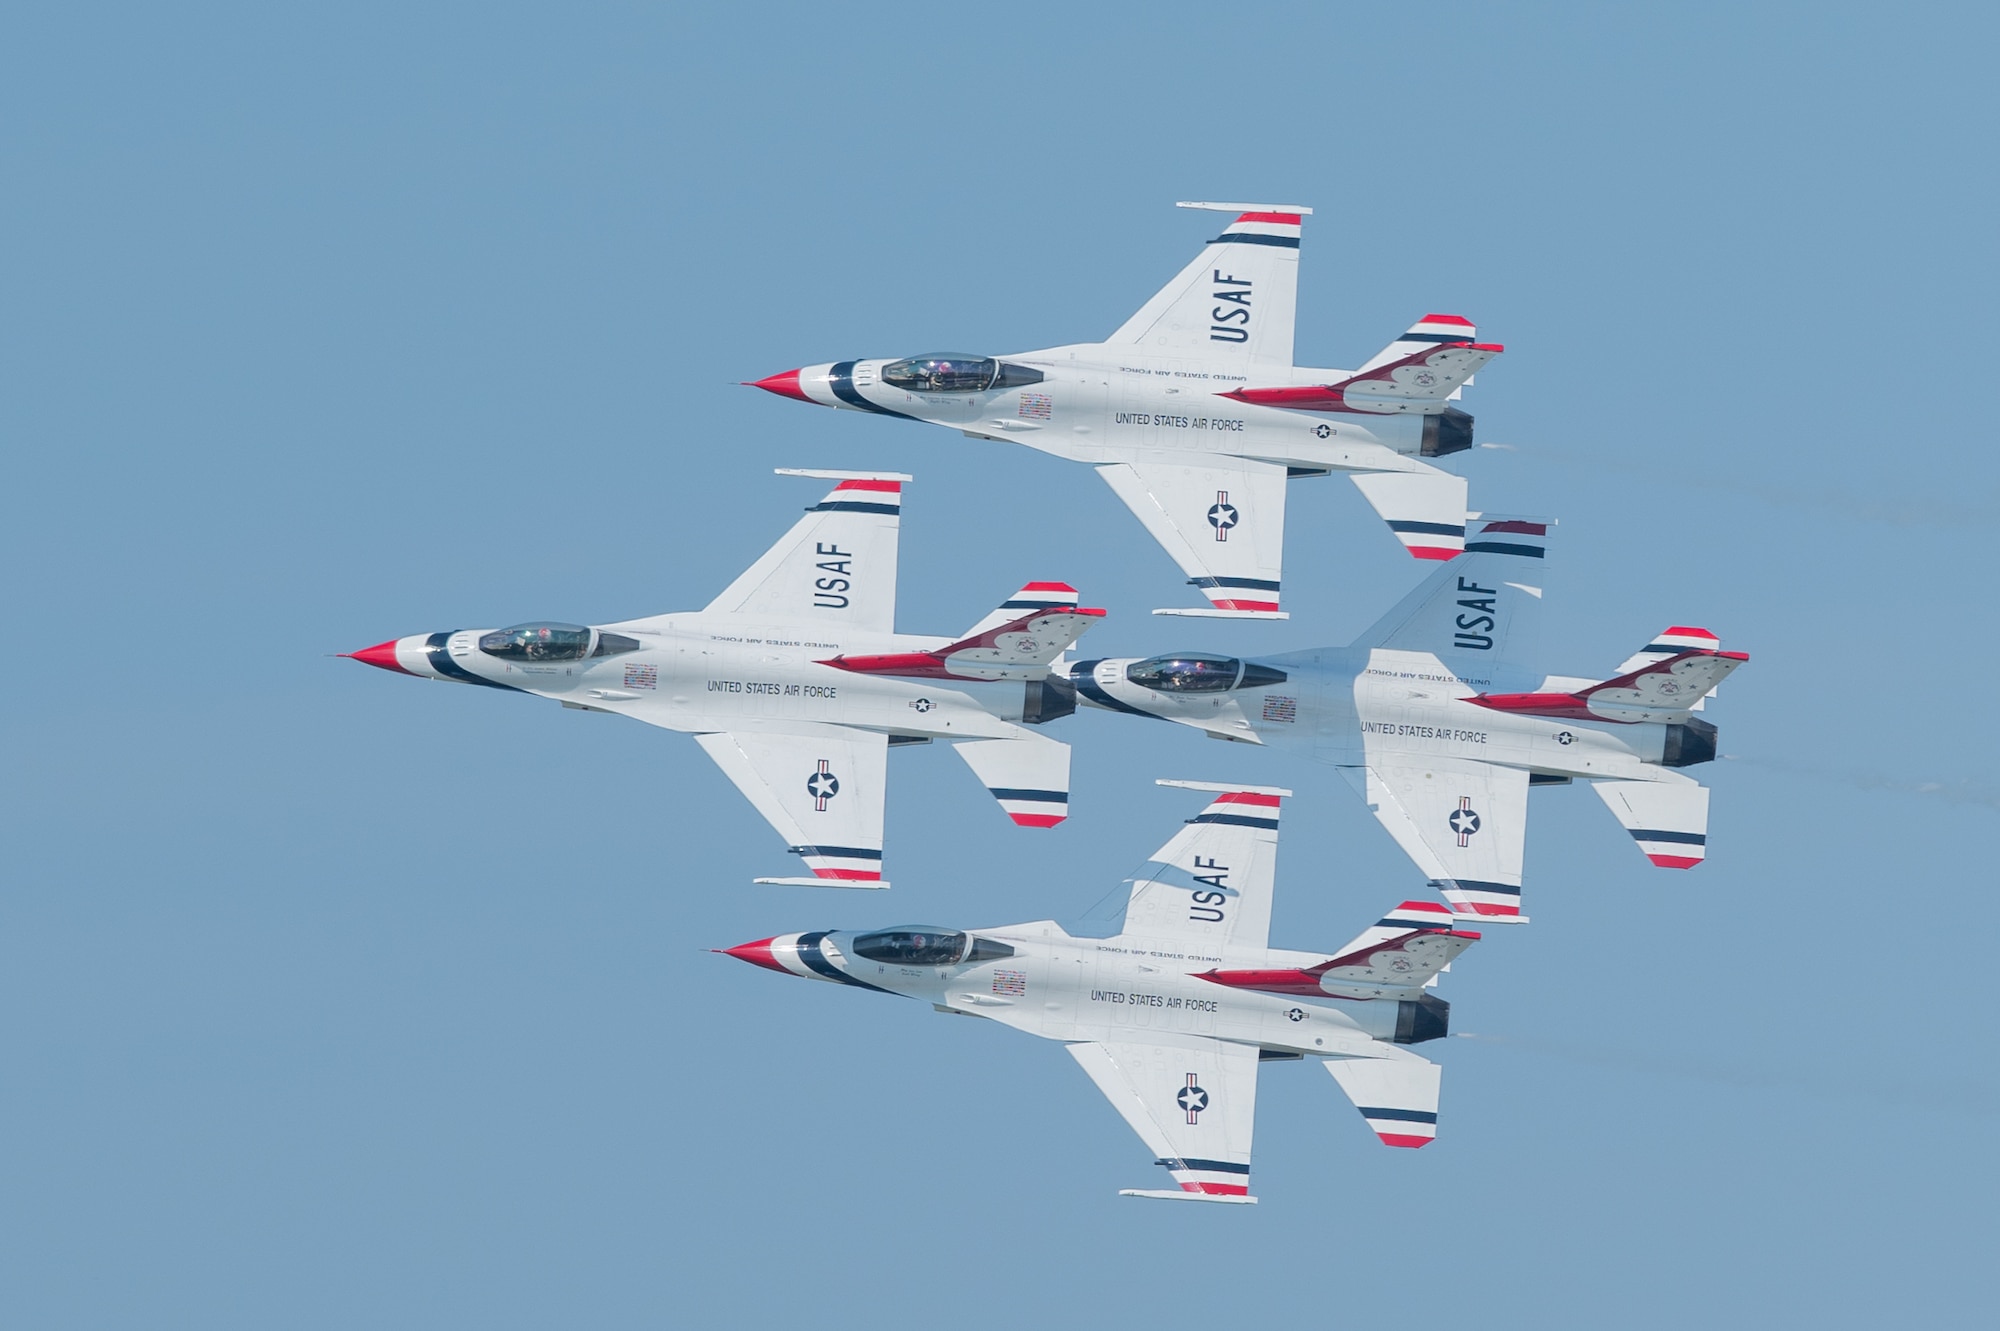 The U.S. Air Force Thunderbirds perform during the first day of the 2022 Thunder Over Dover Airshow, May 21, 2022, at Dover Air Force Base, Delaware. The Thunderbirds performed precision flying maneuvers during the 2022 Thunder Over Dover Open House and Airshow May 21-22. (U.S. Air Force photo by Mauricio Campino)